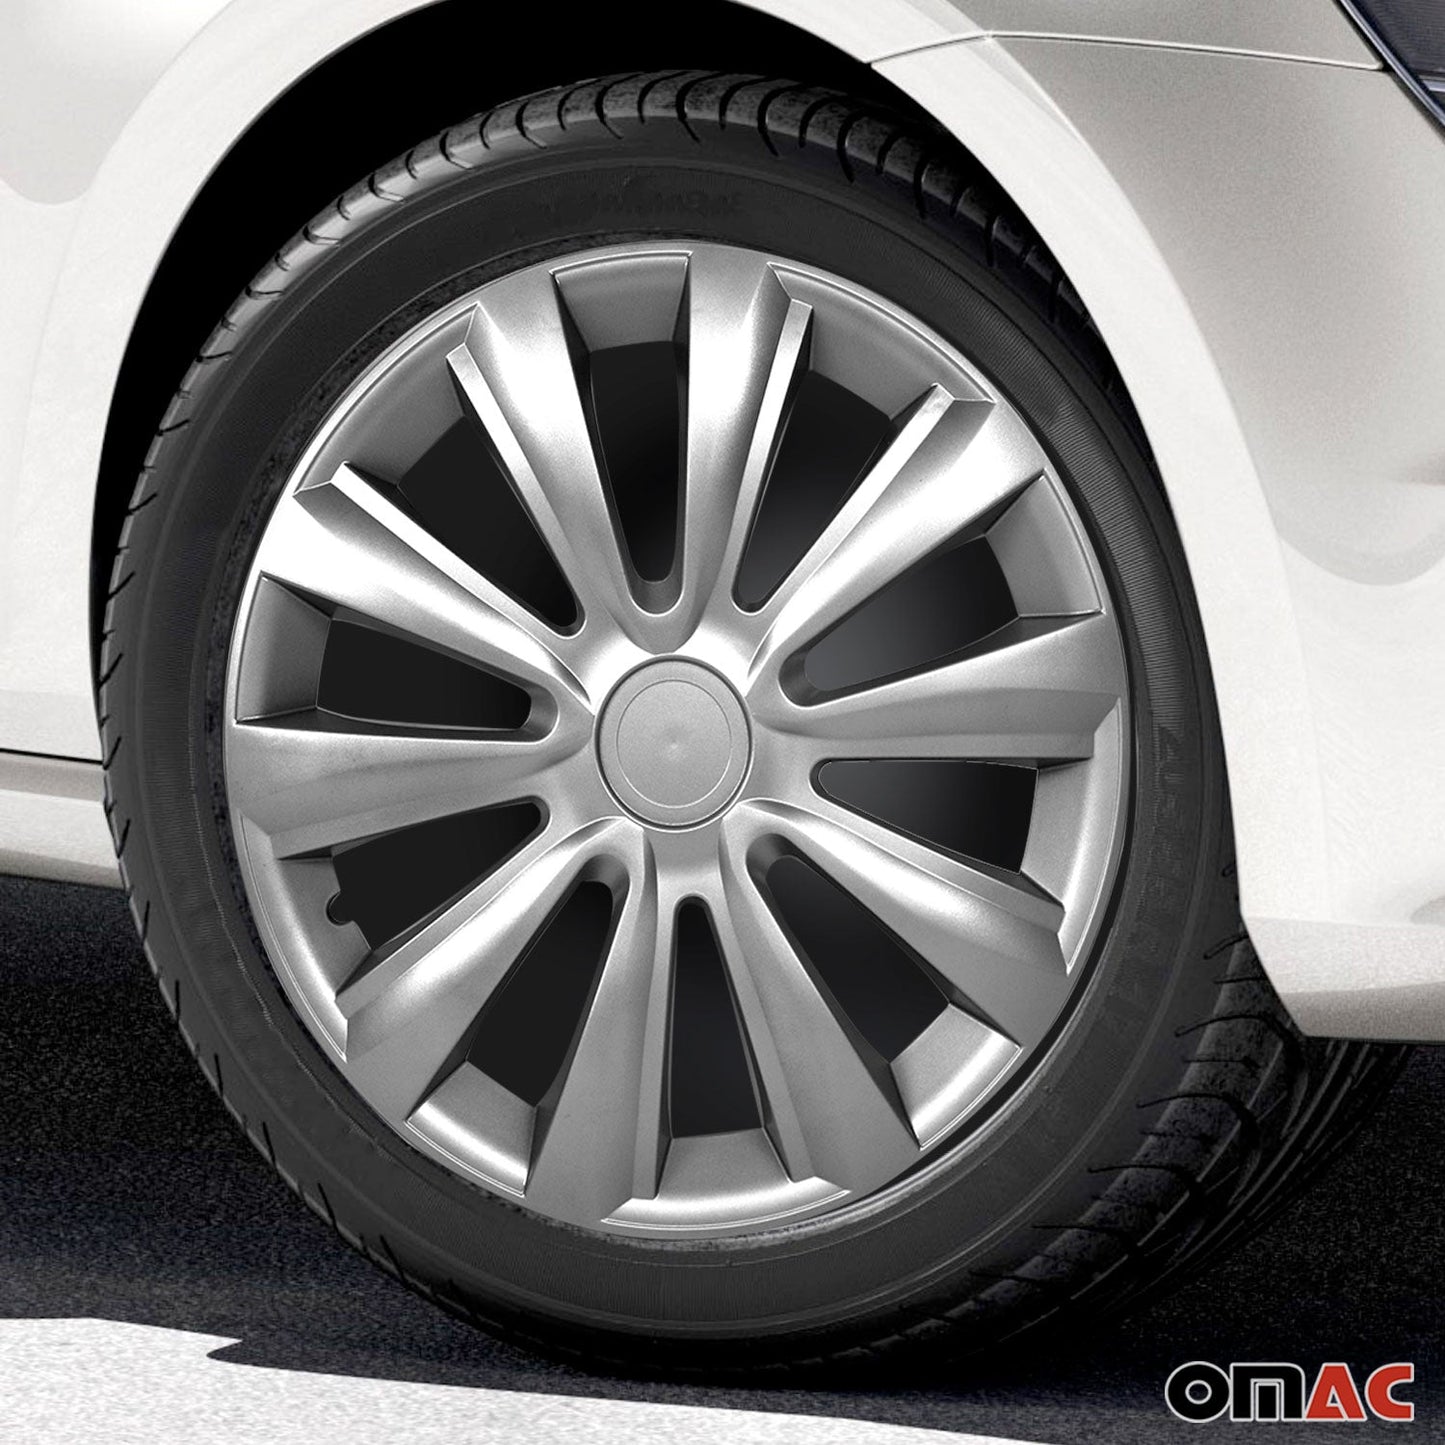 OMAC 16 Inch Wheel Covers Hubcaps for Porsche Silver Gray Gloss G002351